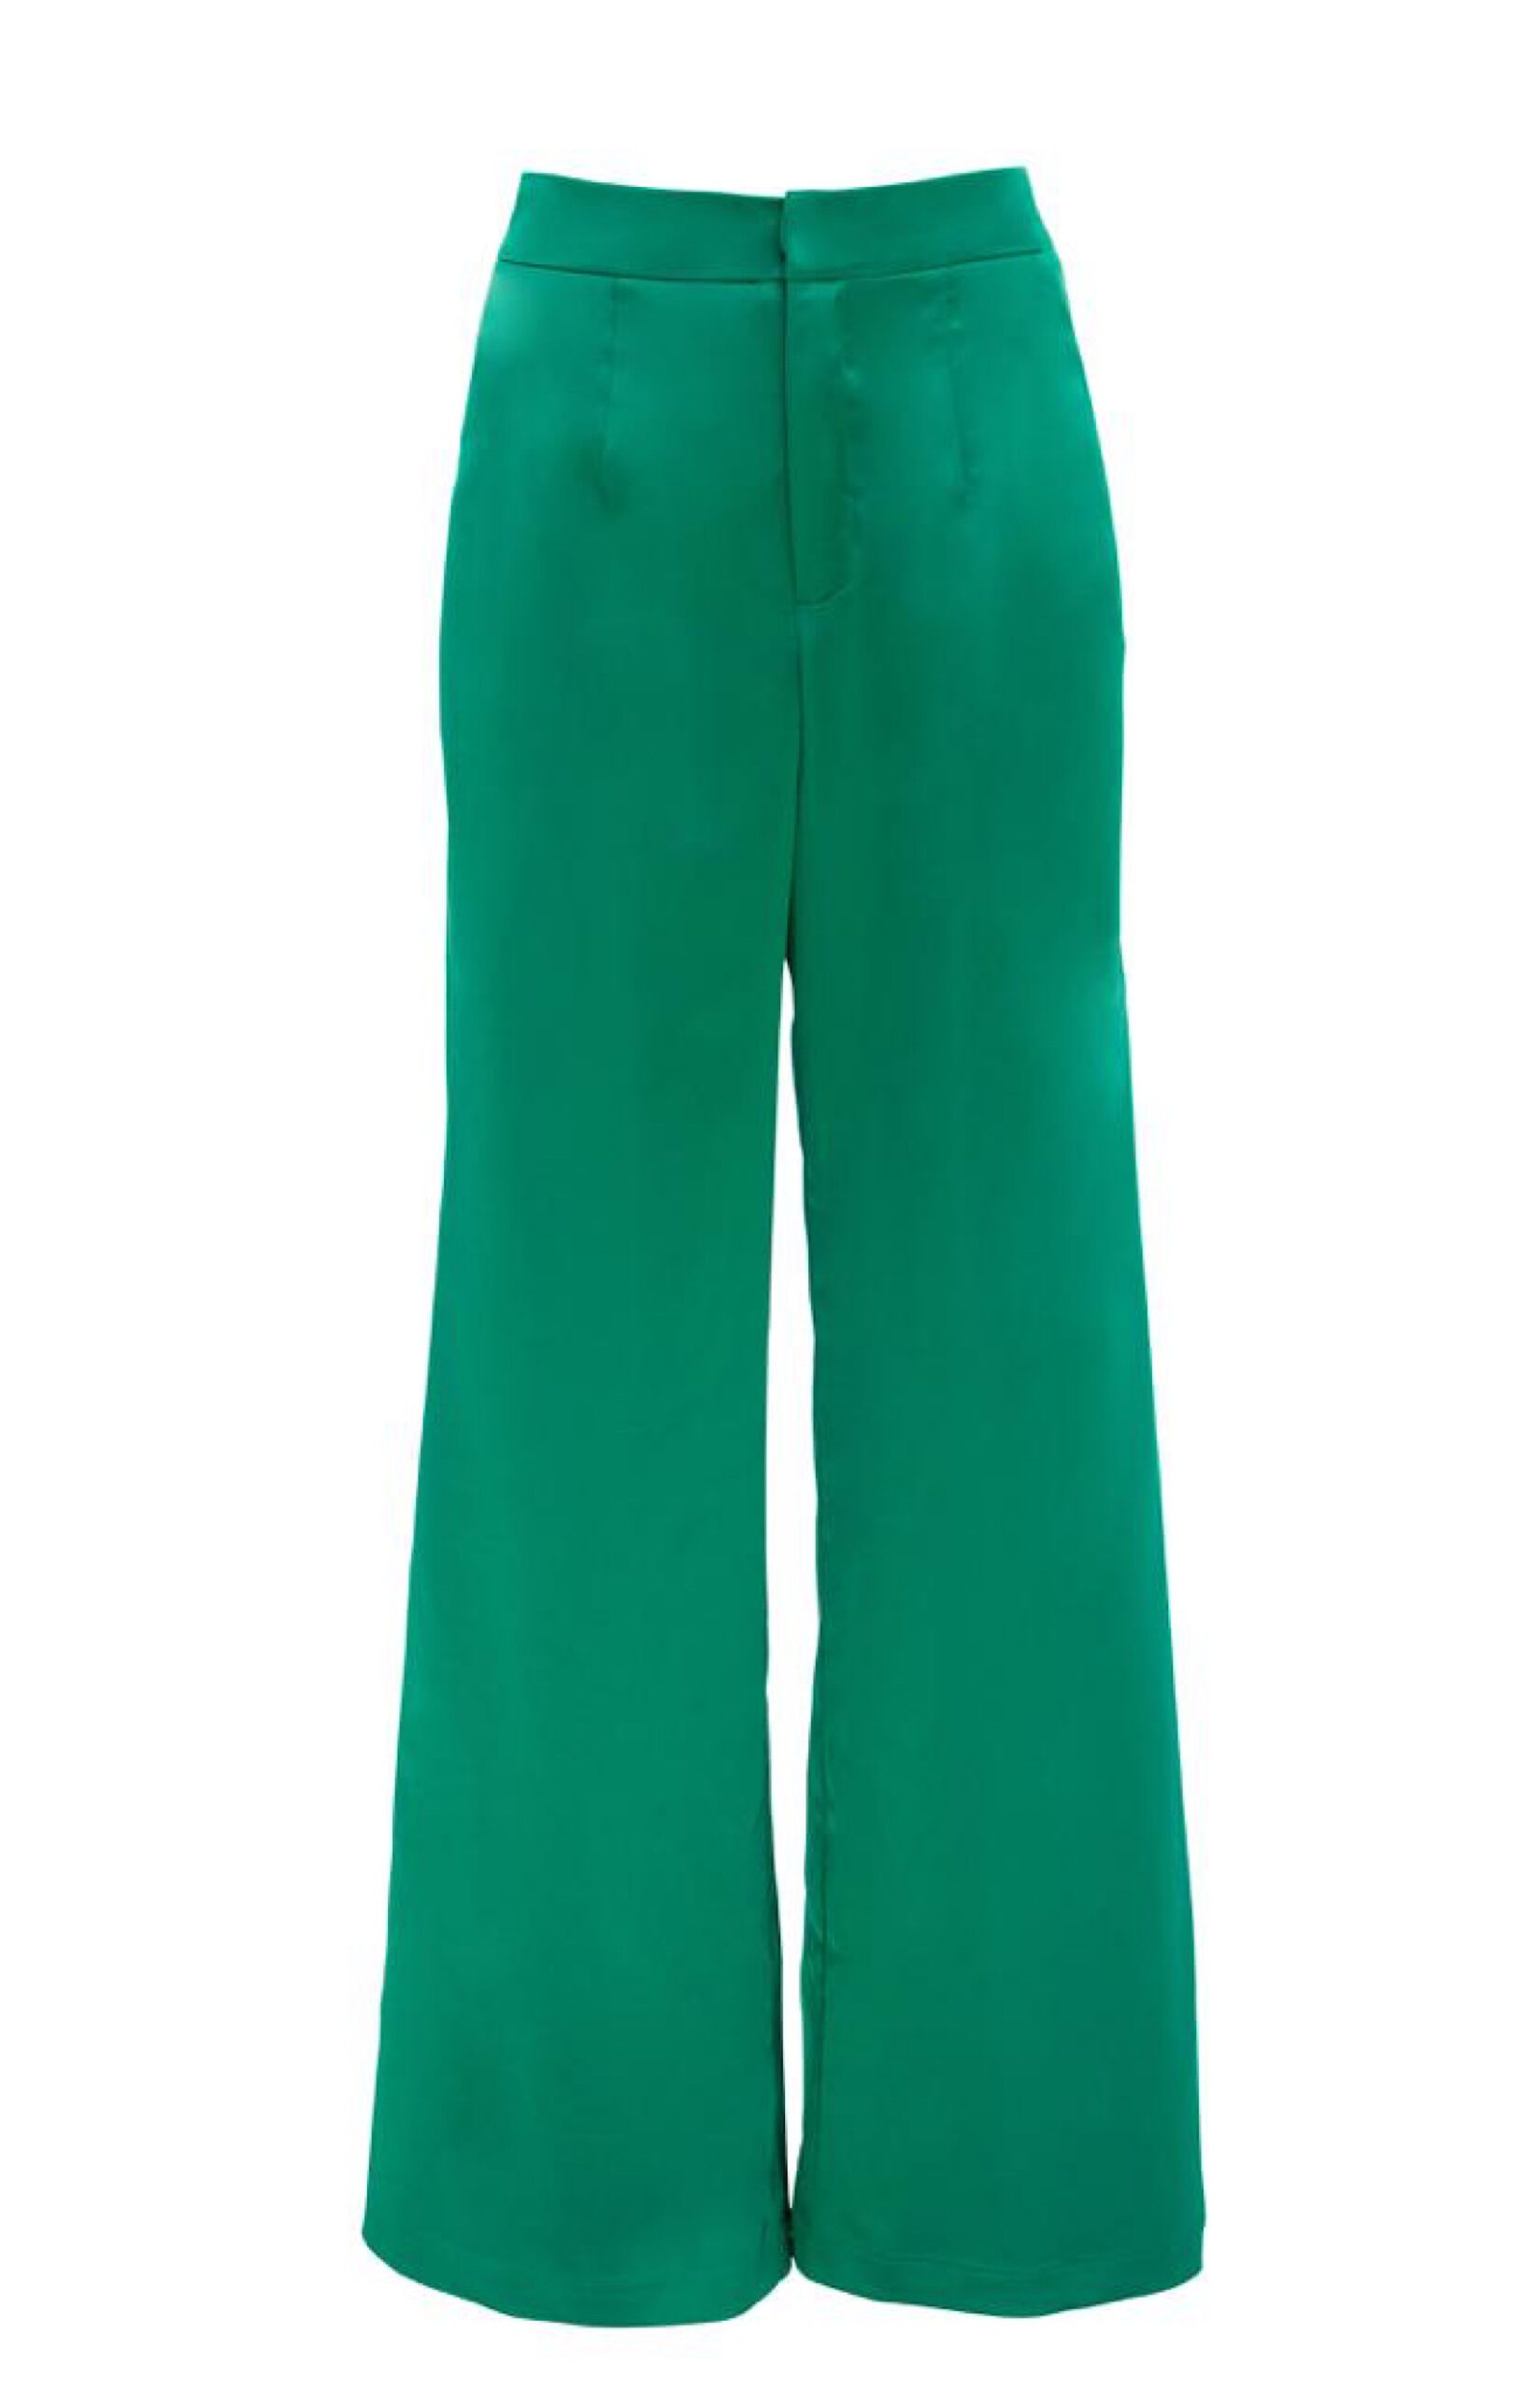 la-chaine-andromeda-pants-green-product-true-grace-scaled-1.jpg